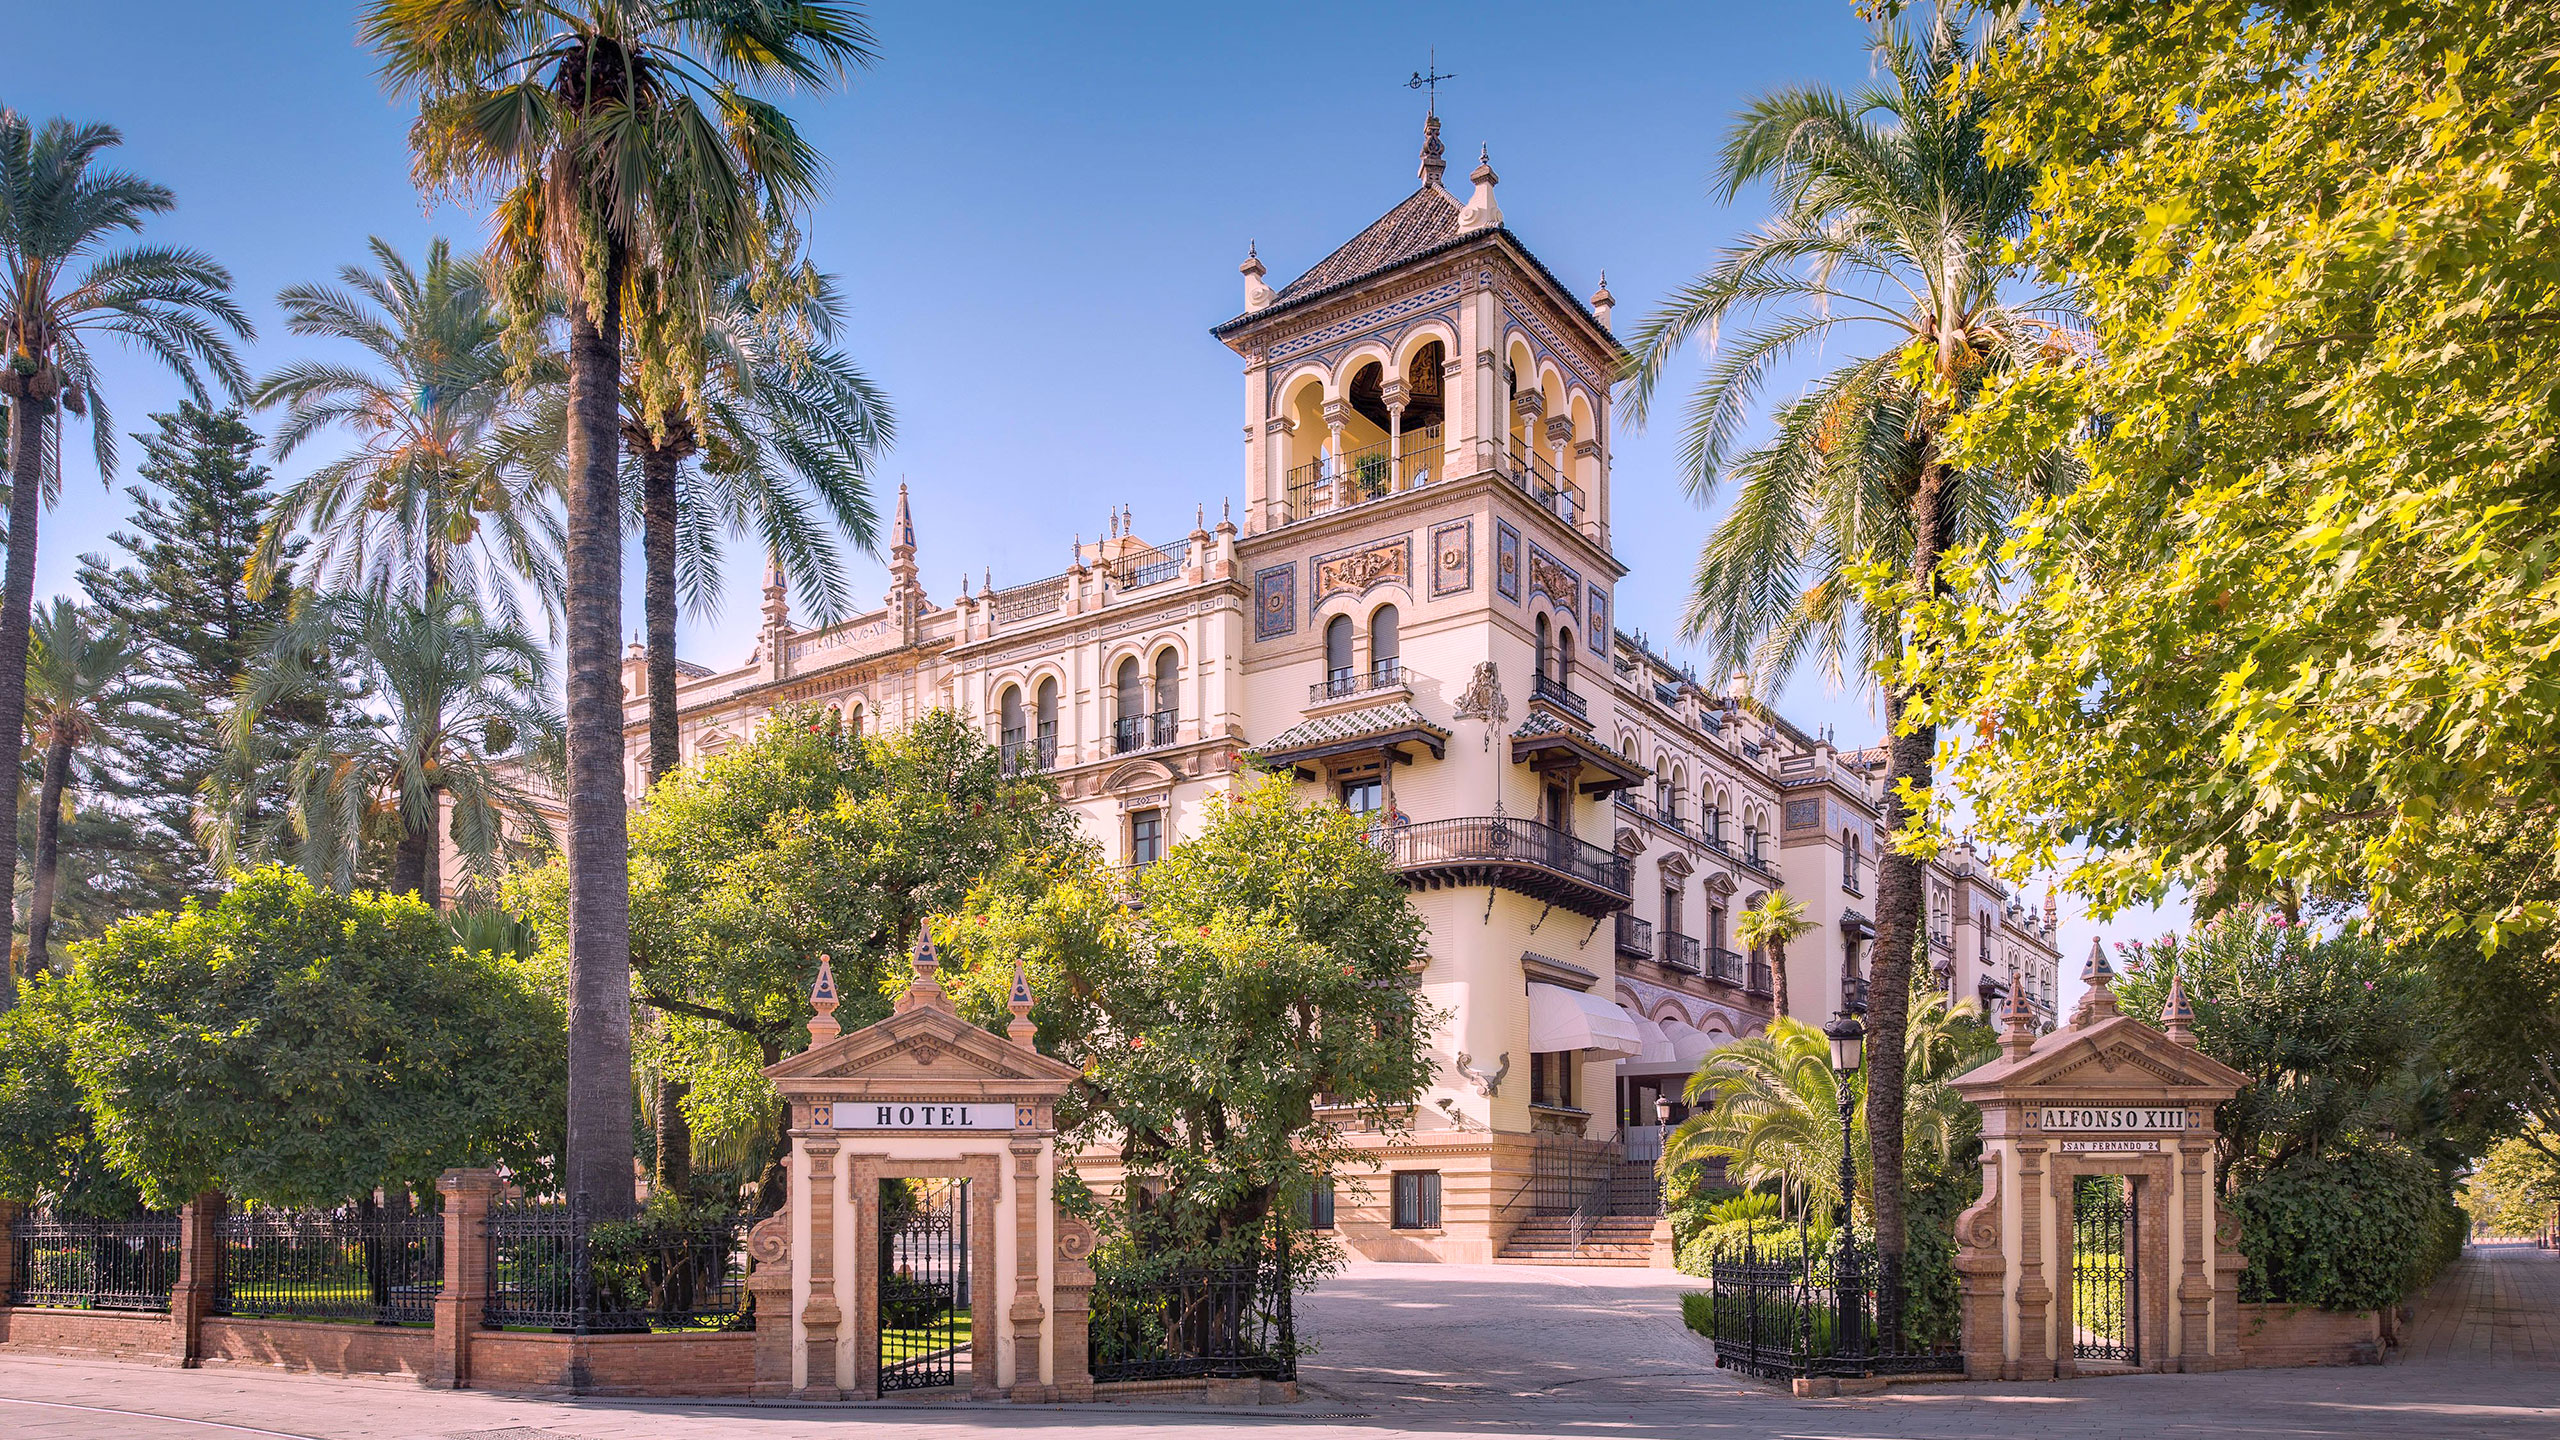 Hotels of the world: Hotel Alfonso XIII, Seville, Spain